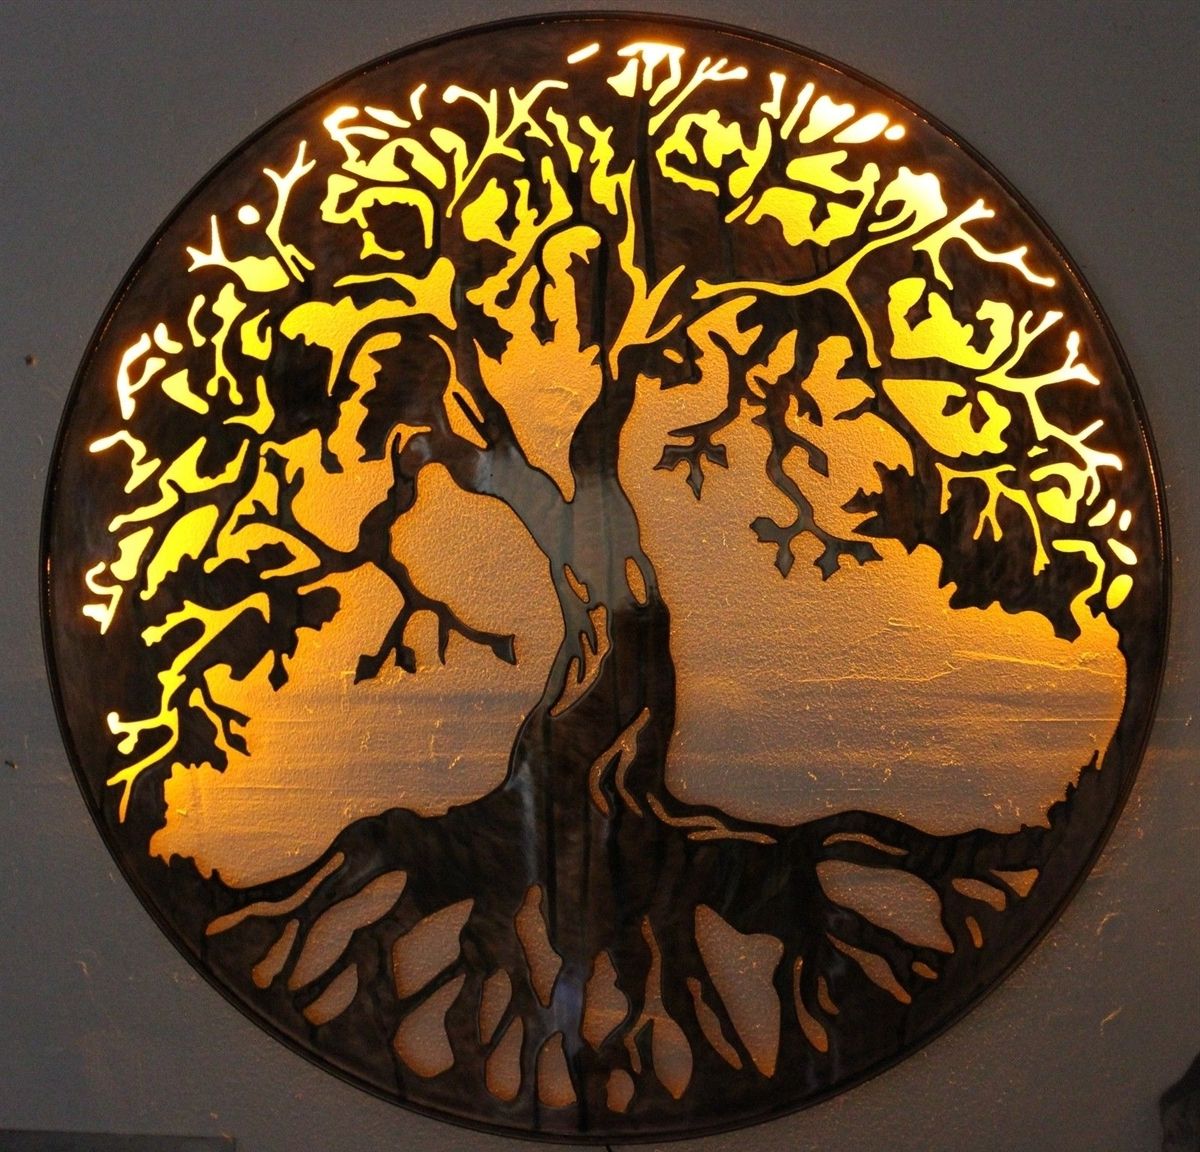 Tree Of Life Metal Wall Art 24" With Led Lightshgmw Regarding Most Recent Tree Of Life Metal Wall Art (View 3 of 15)